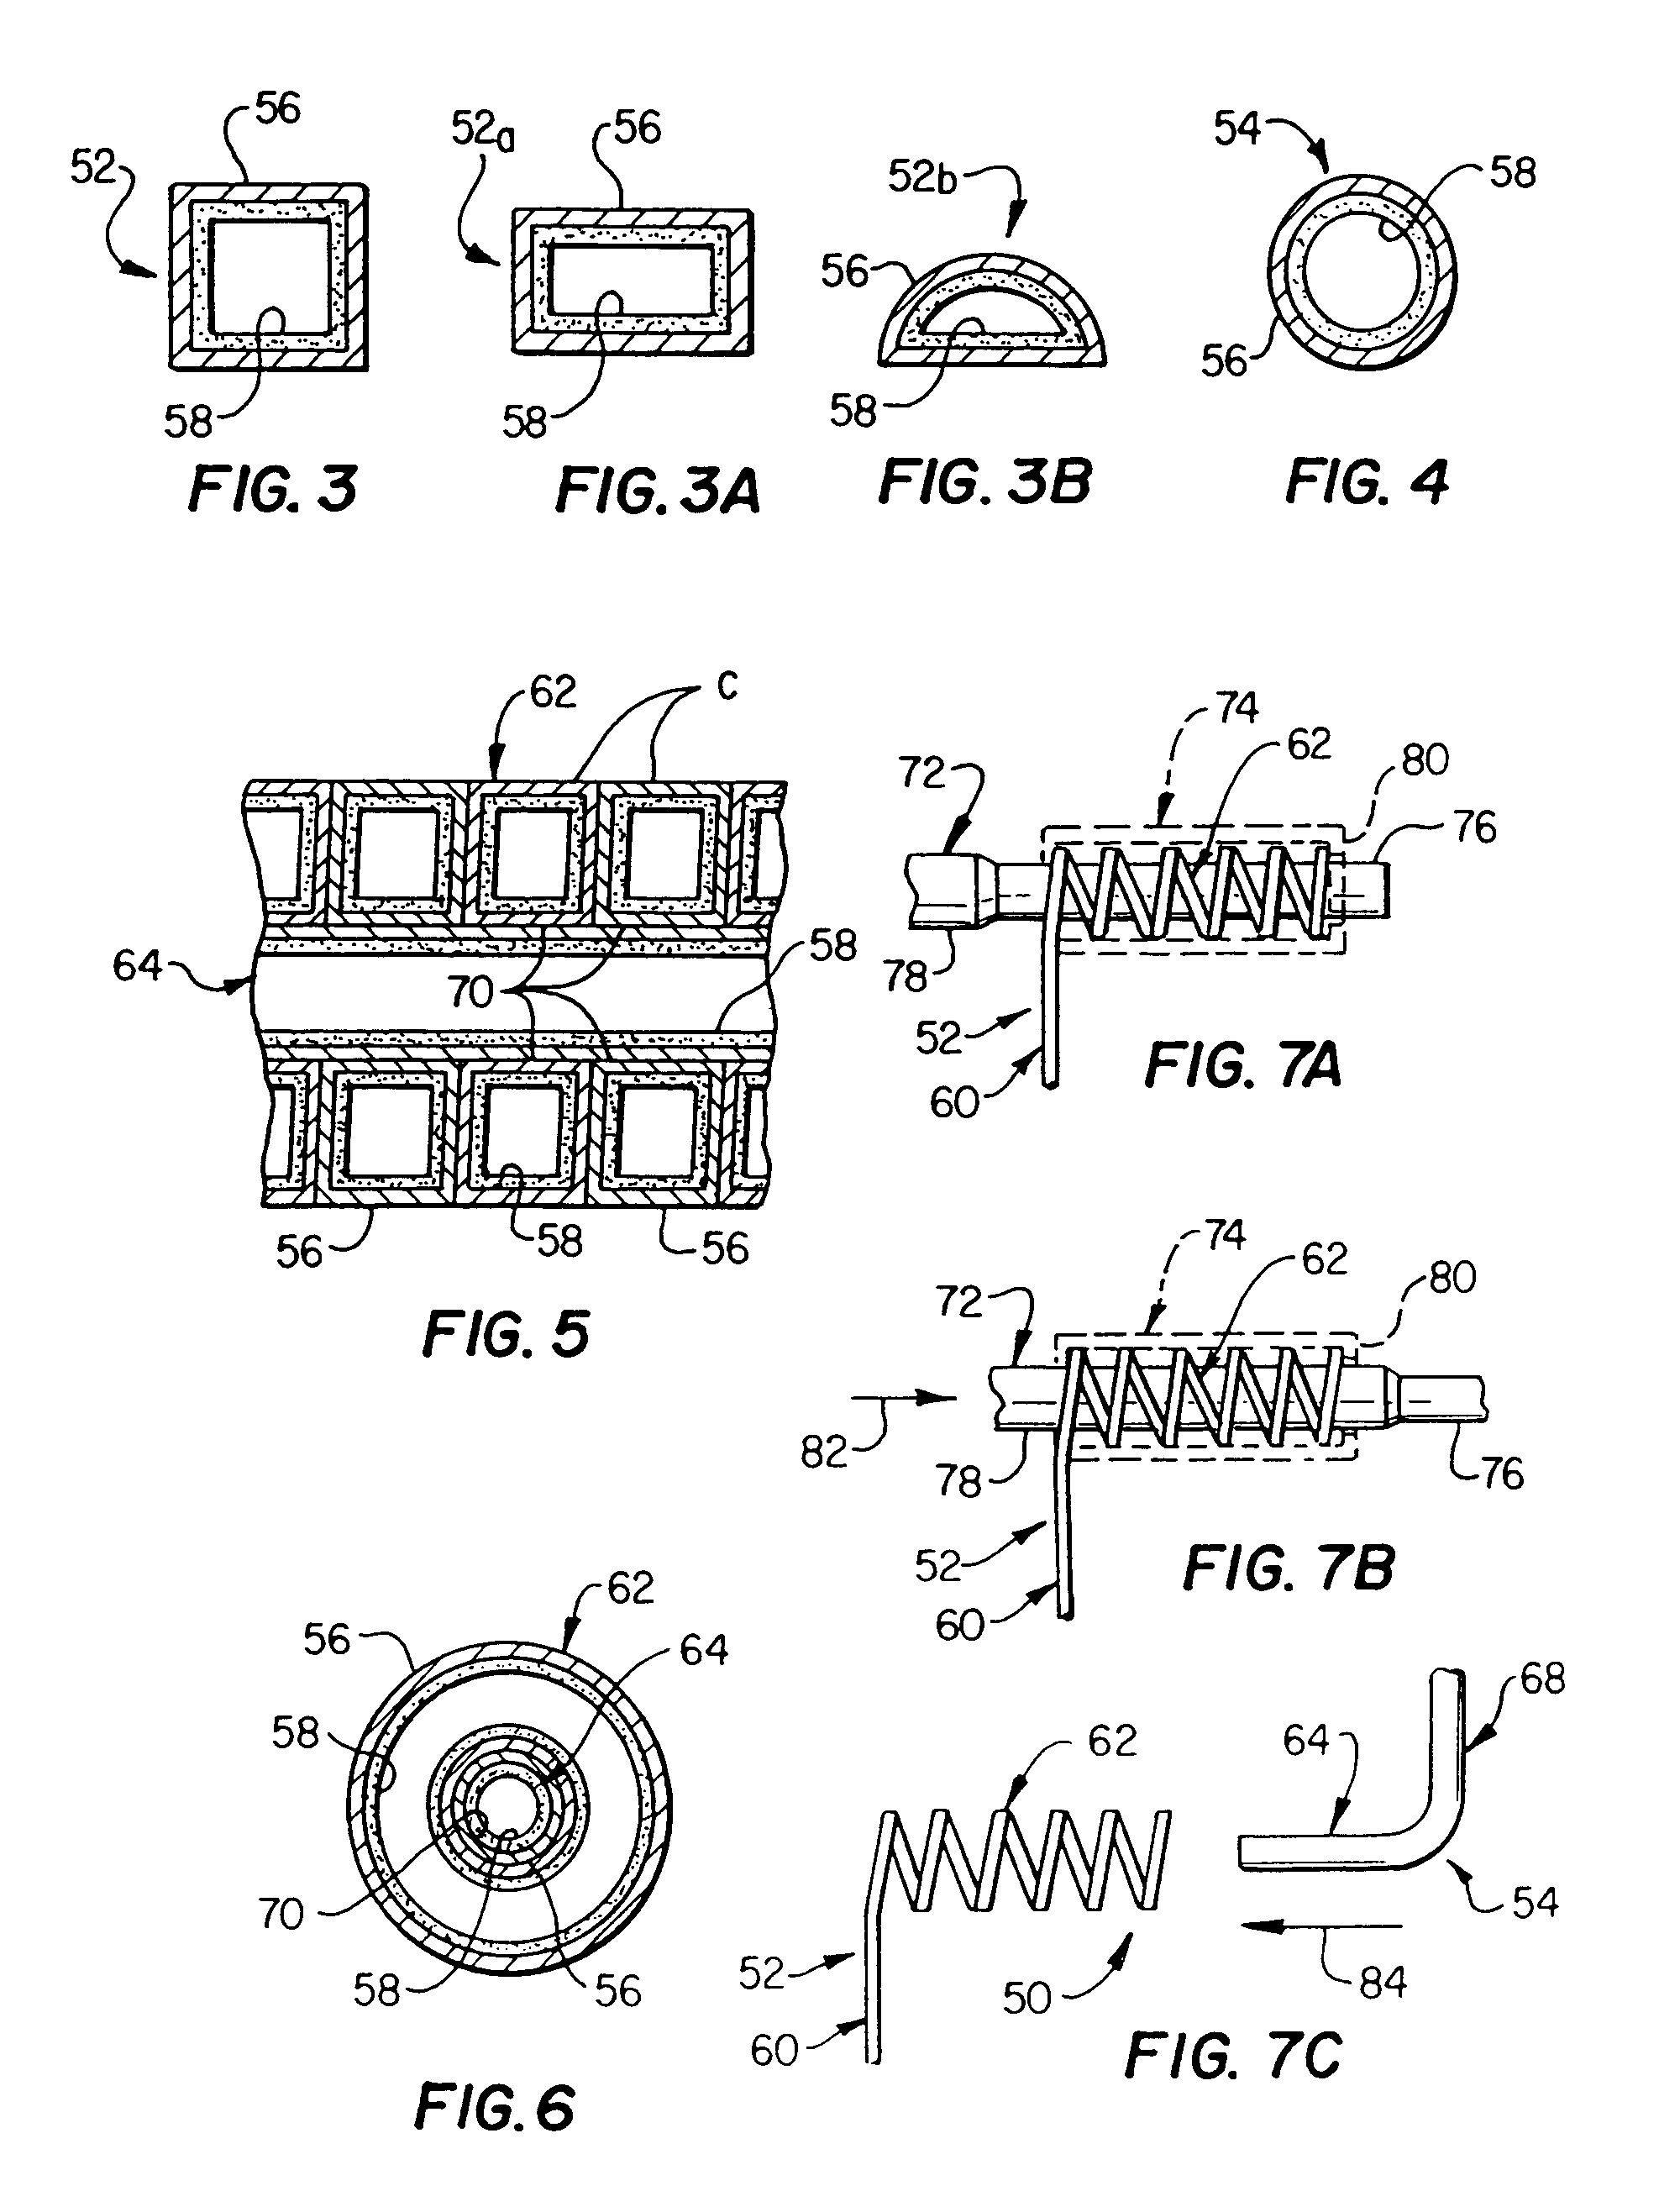 Flexible heat pipe structure and associated methods for dissipating heat in electronic apparatus